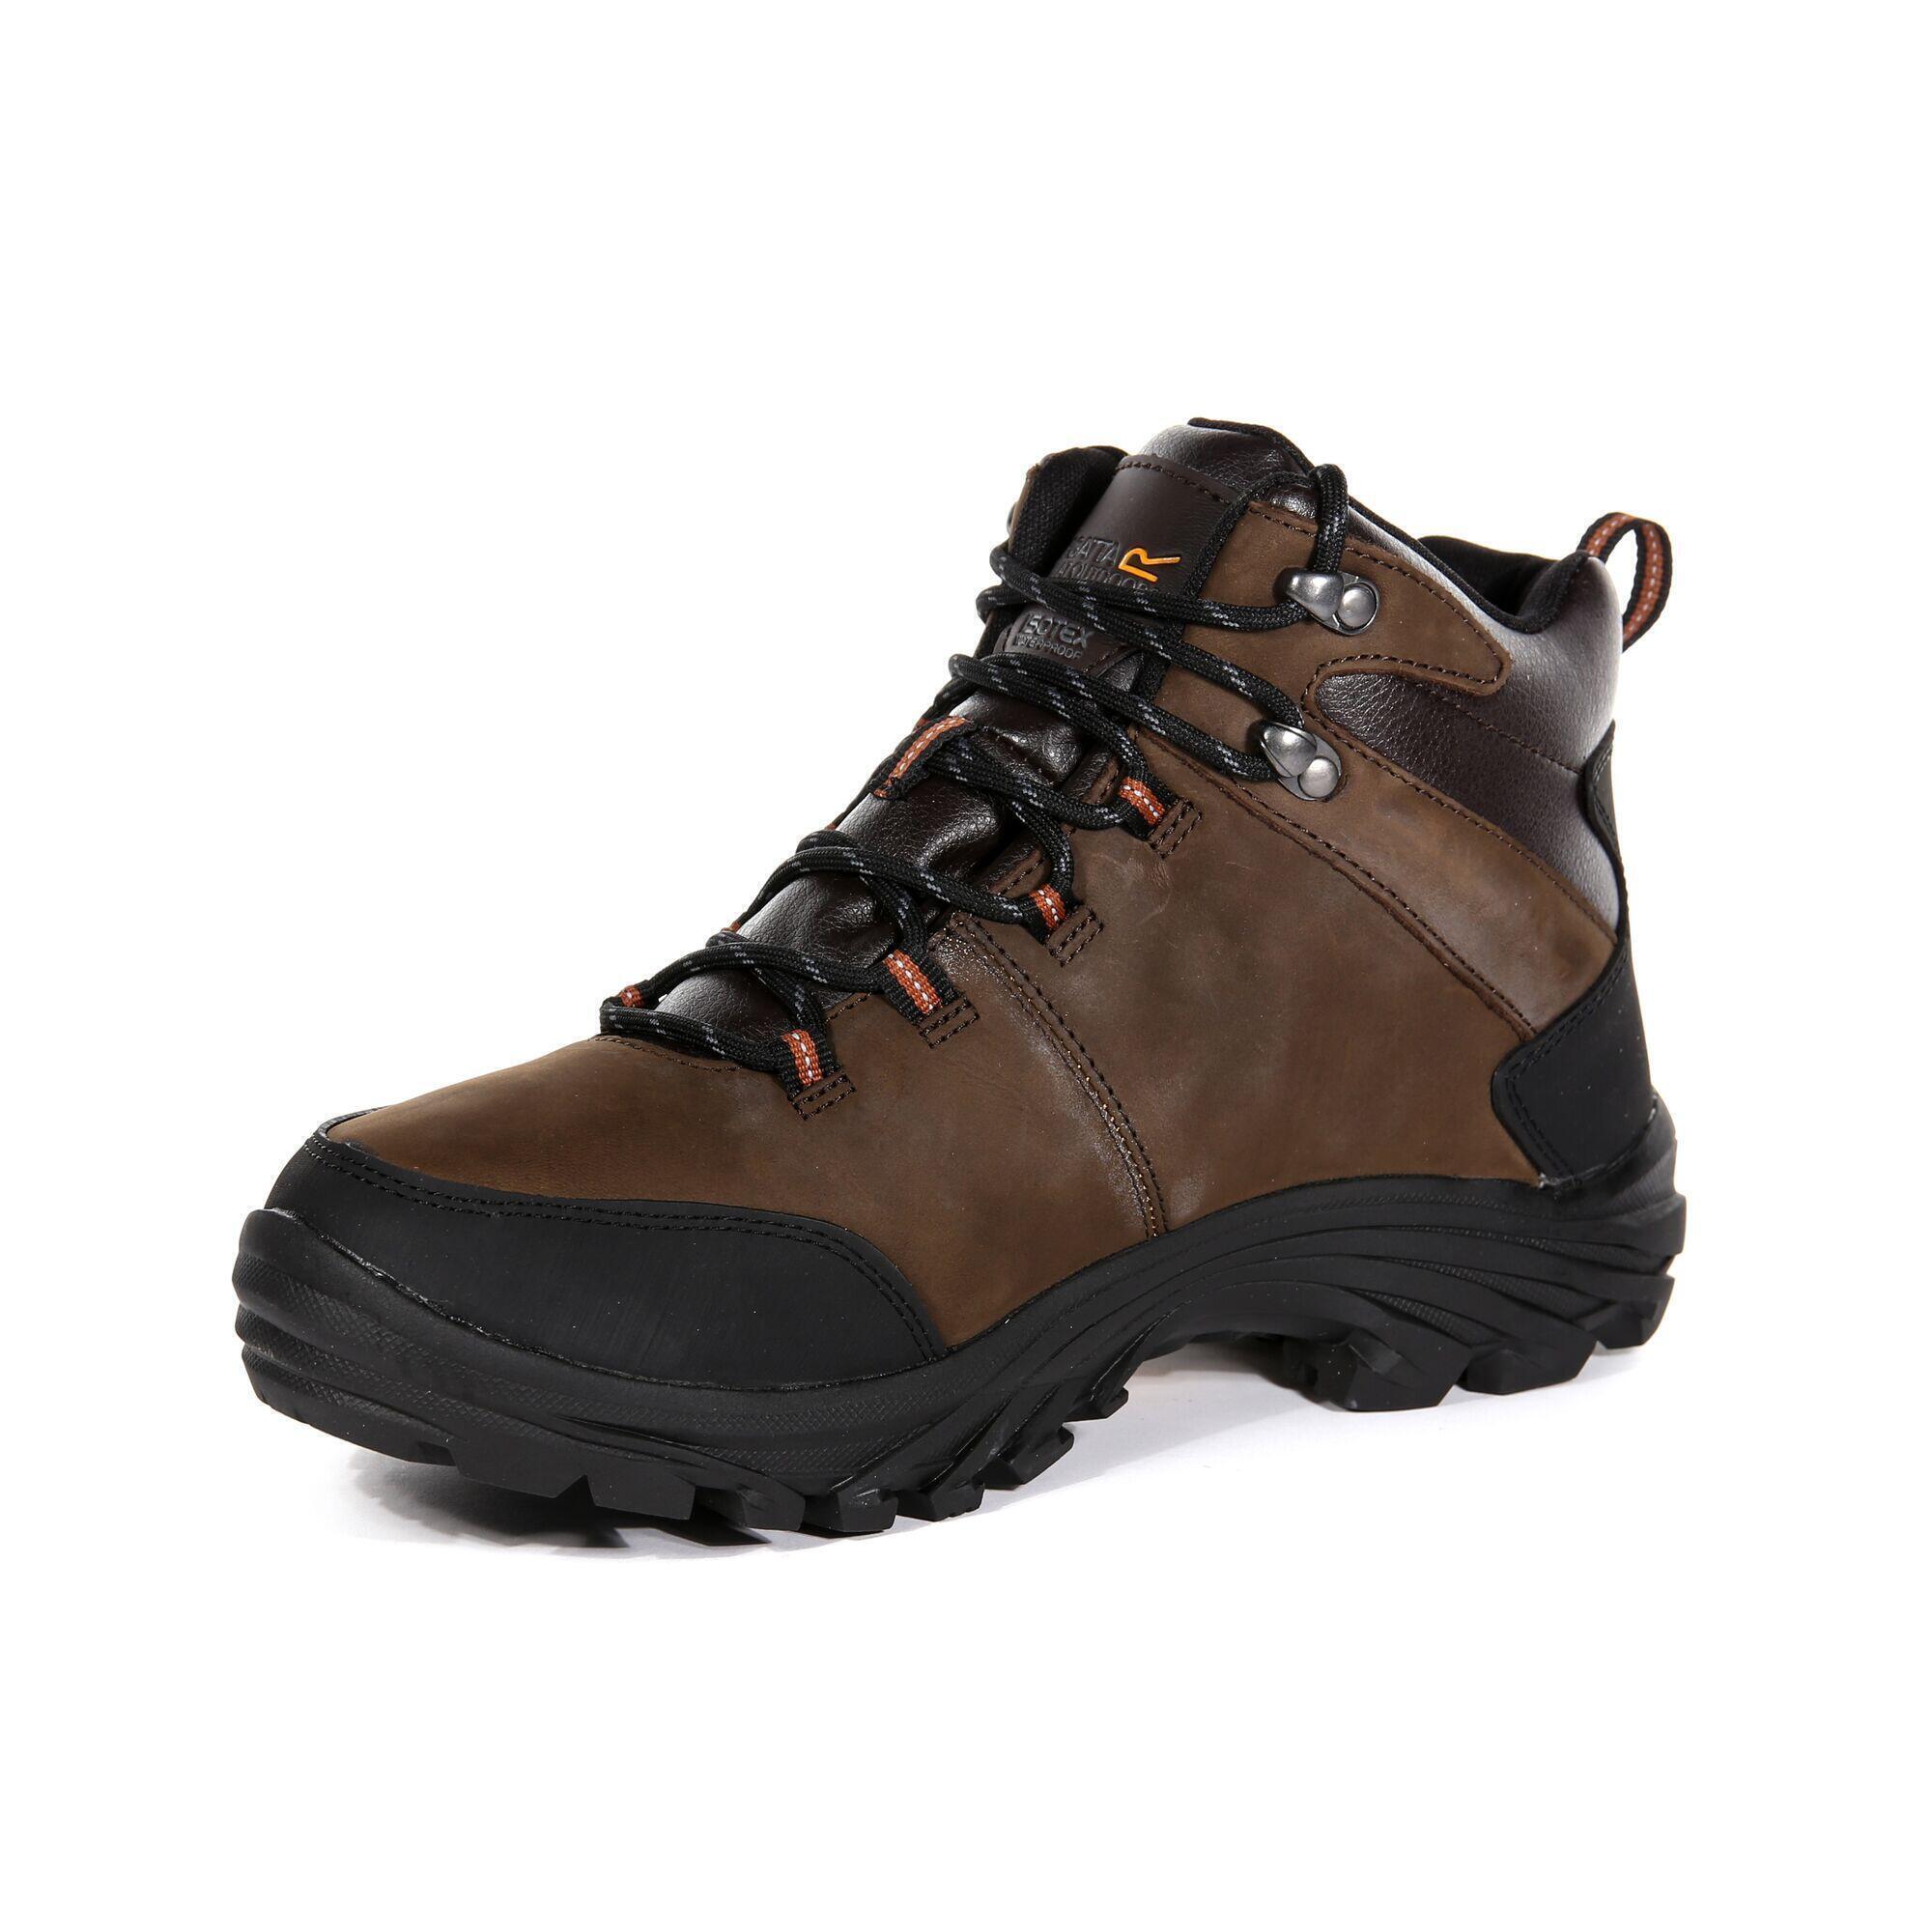 Burrell Leather Men's Walking Boots 4/5